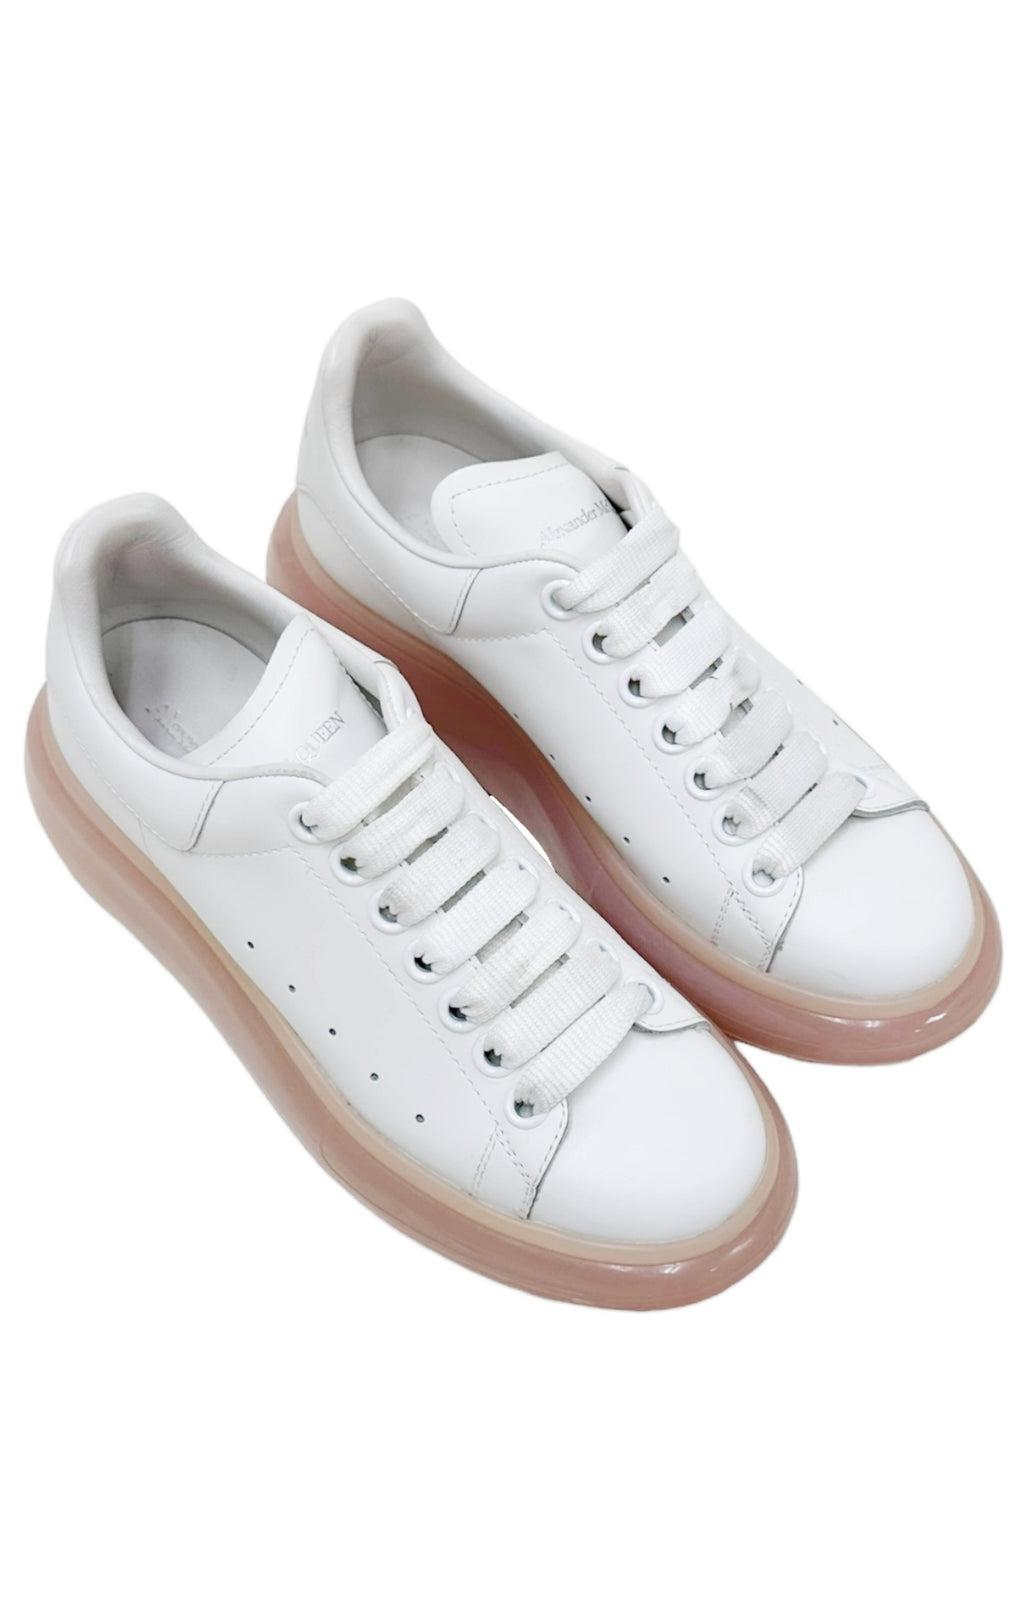 ALEXANDER MCQUEEN (RARE) Sneakers Size: EUR 36 / Fit like US 6